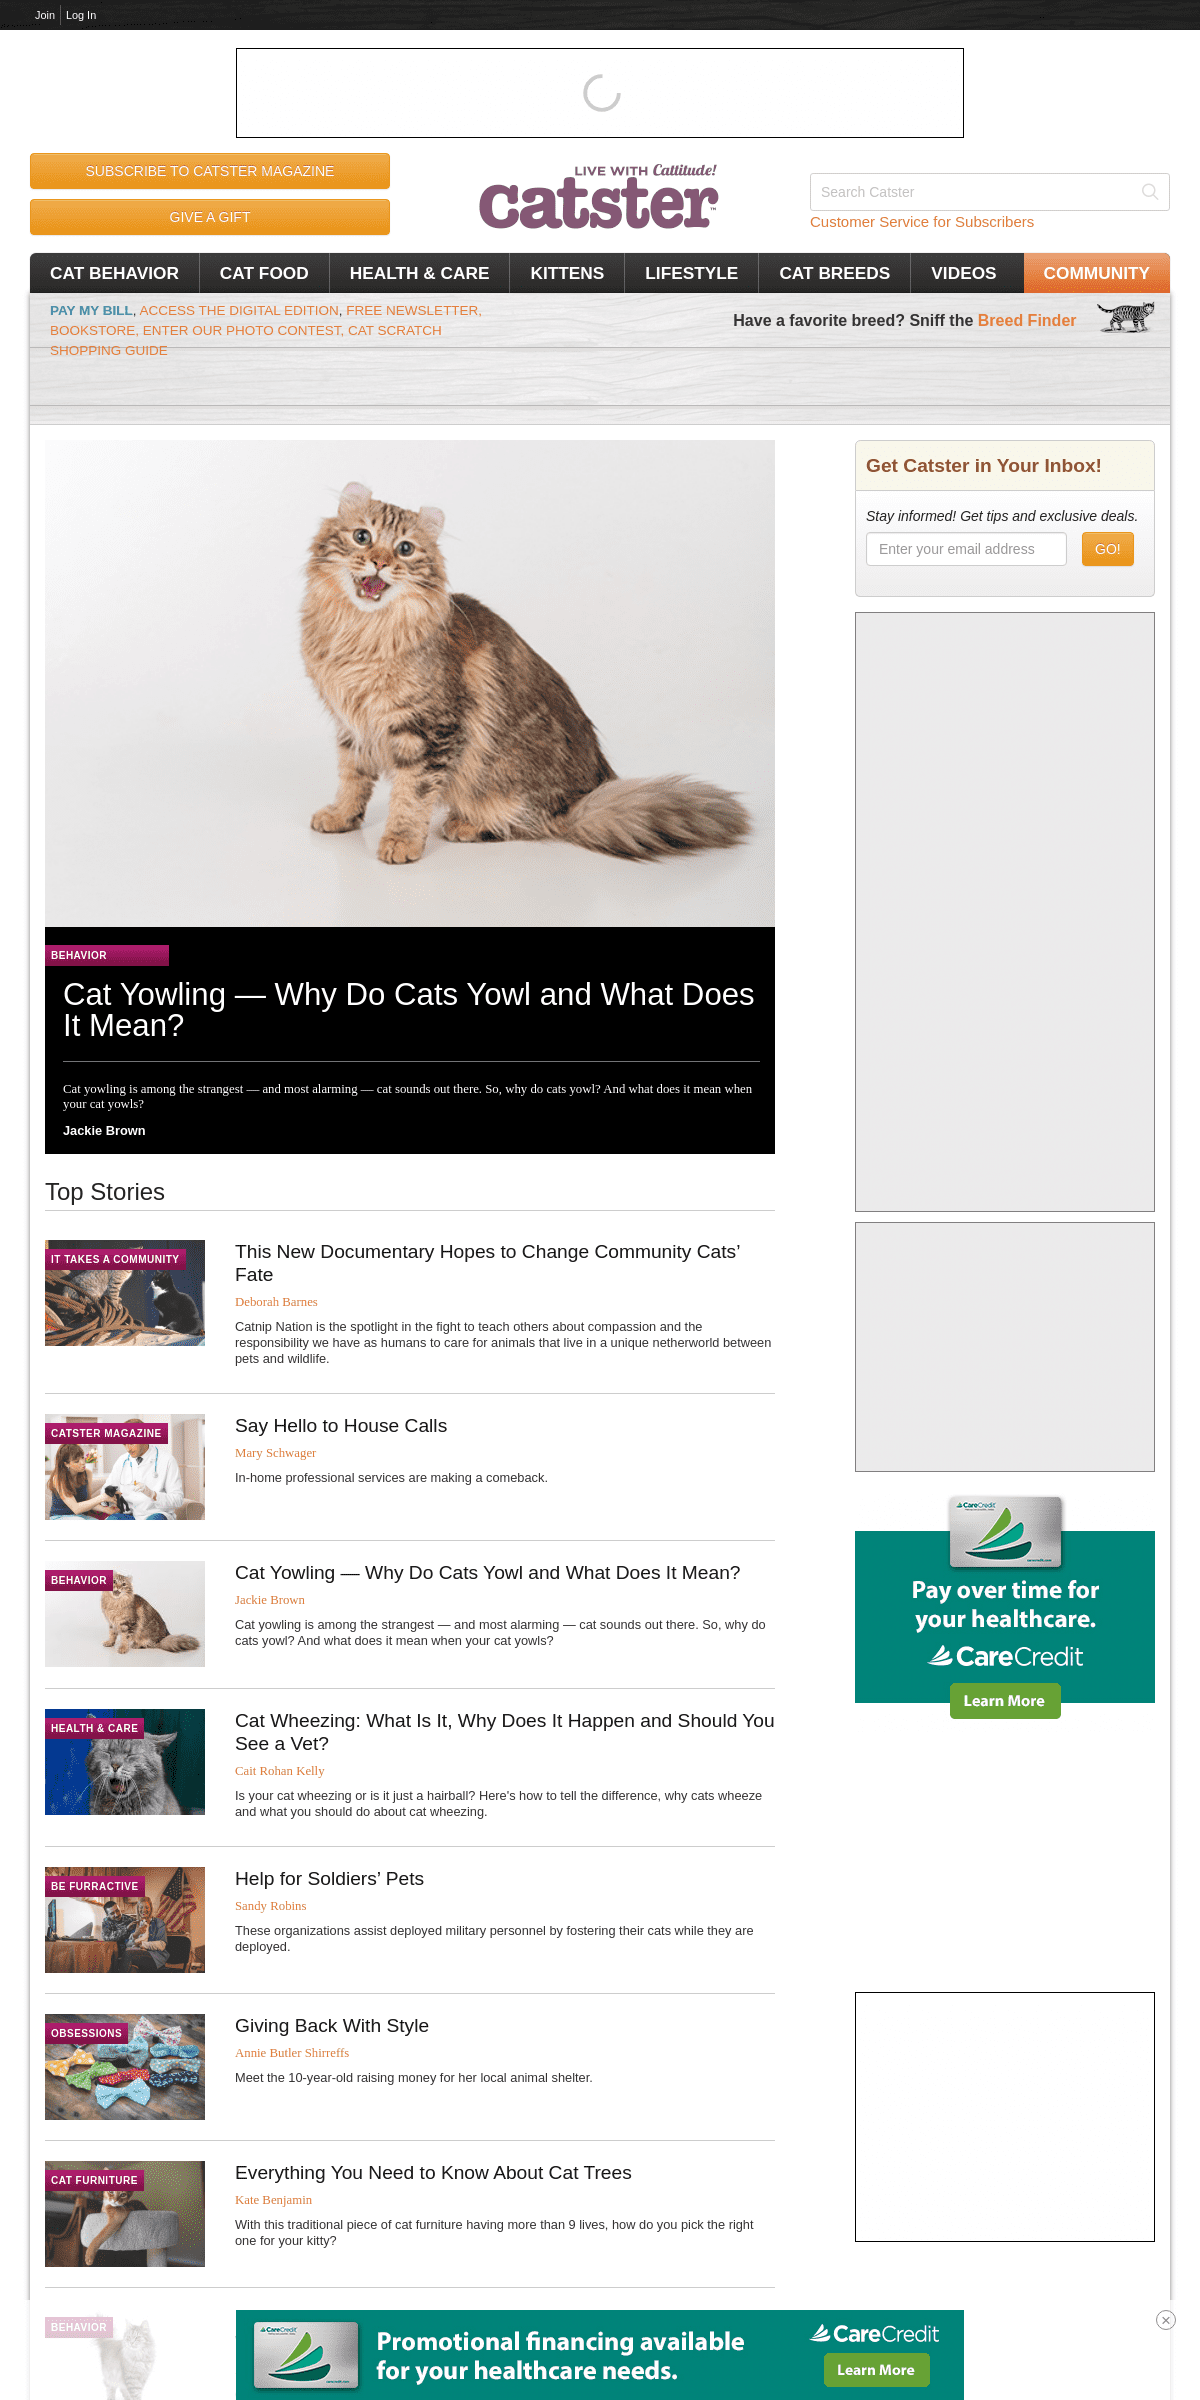 A complete backup of catster.com